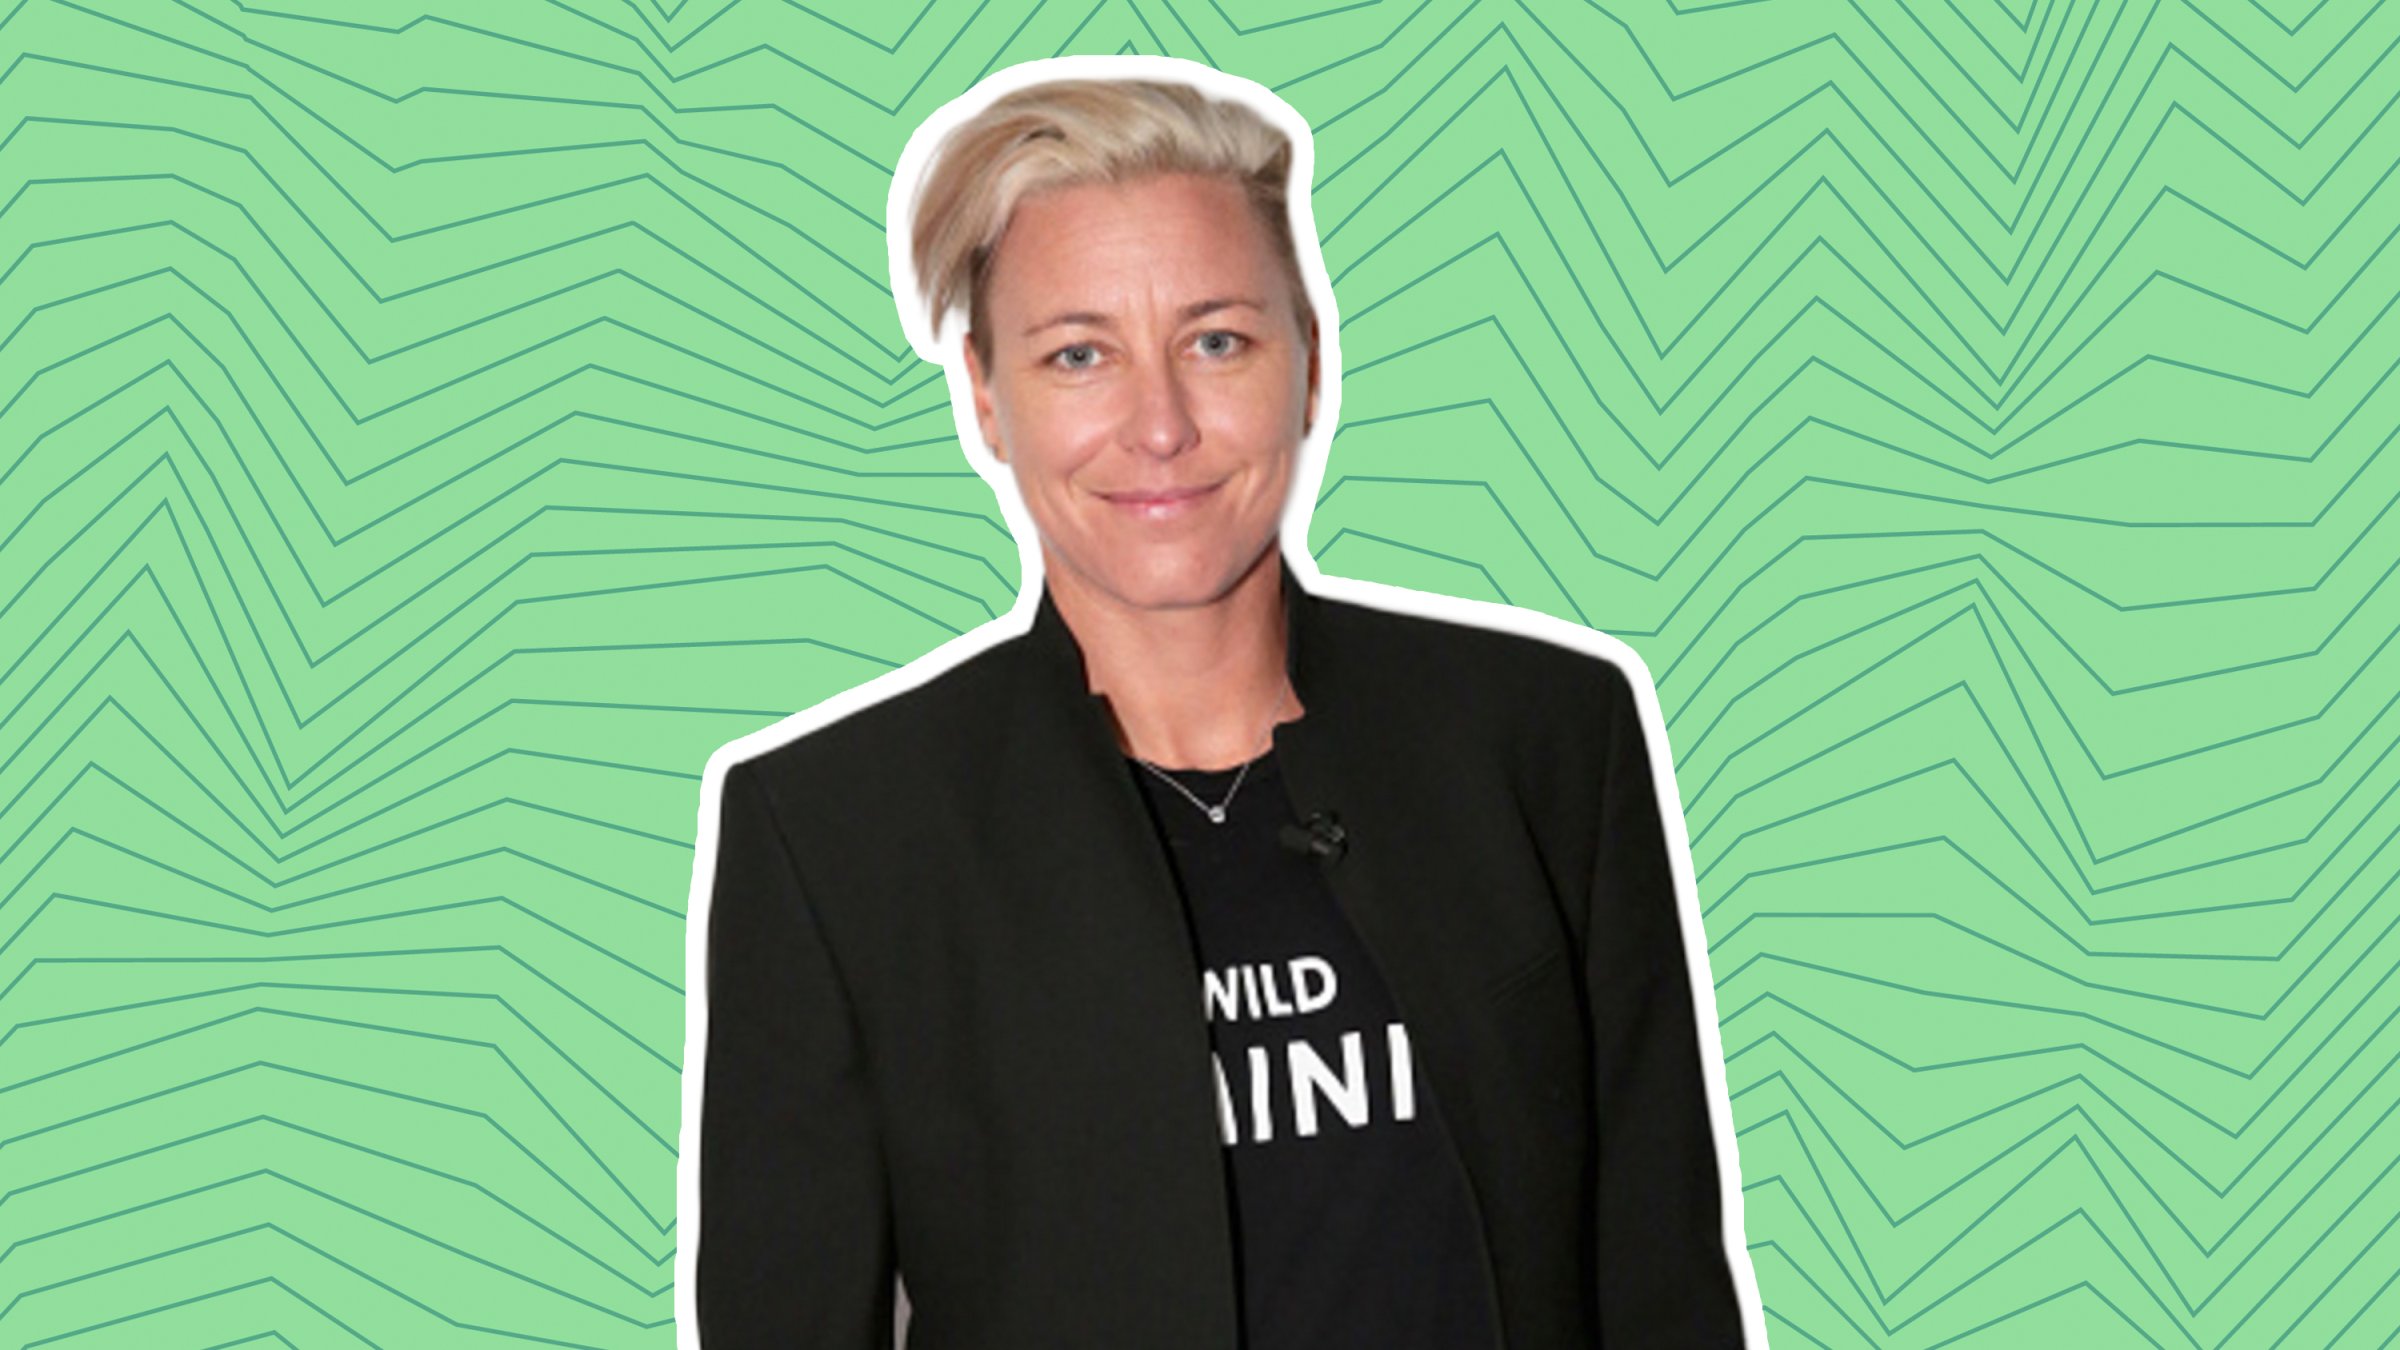 Former professional soccer player Abby Wambach attends the Pennsylvania Conference for Women 2016 at Pennsylvania Convention Center on October 6, 2016 in Philadelphia, Pennsylvania.